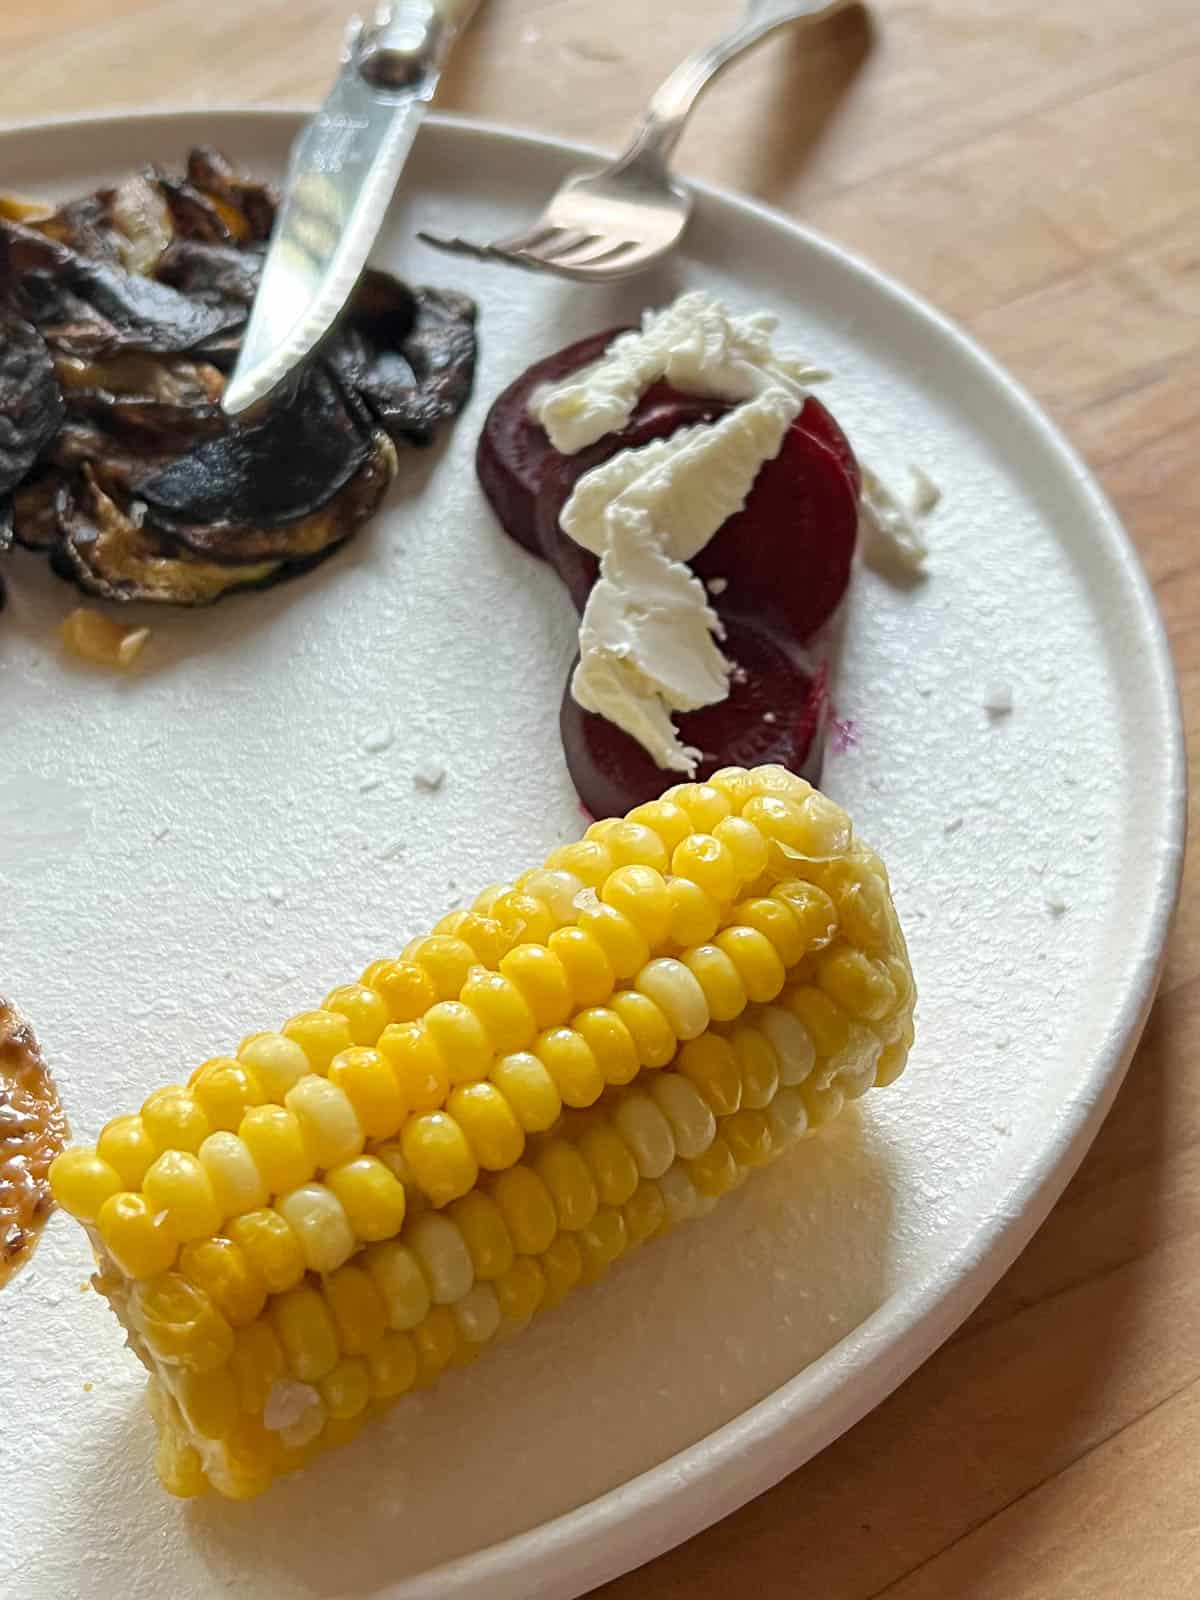 Frozen corn on the cob after reheating.